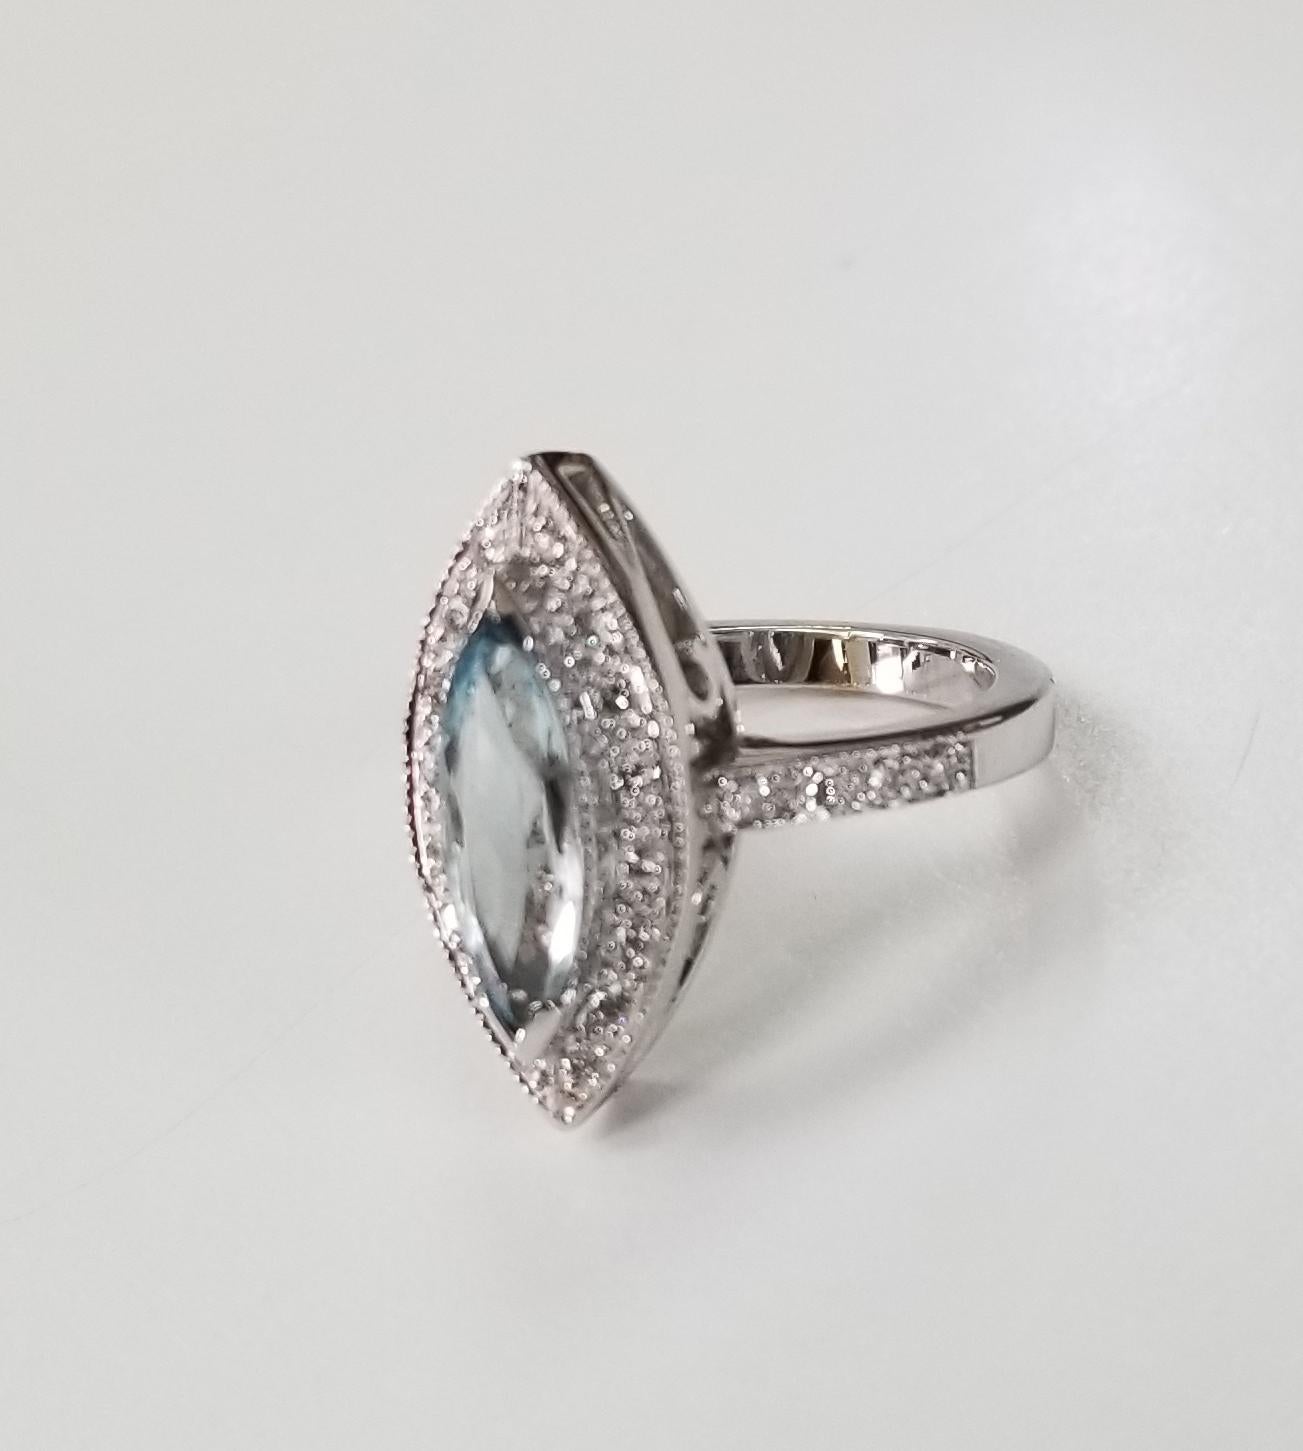 14k white gold Blue Topaz and diamond ring, containing 1 marquise blue topaz weighing 1.00cts. and 18 round diamonds weighing .35pts.  This ring is a size 6.5 but we will size to fit for free.